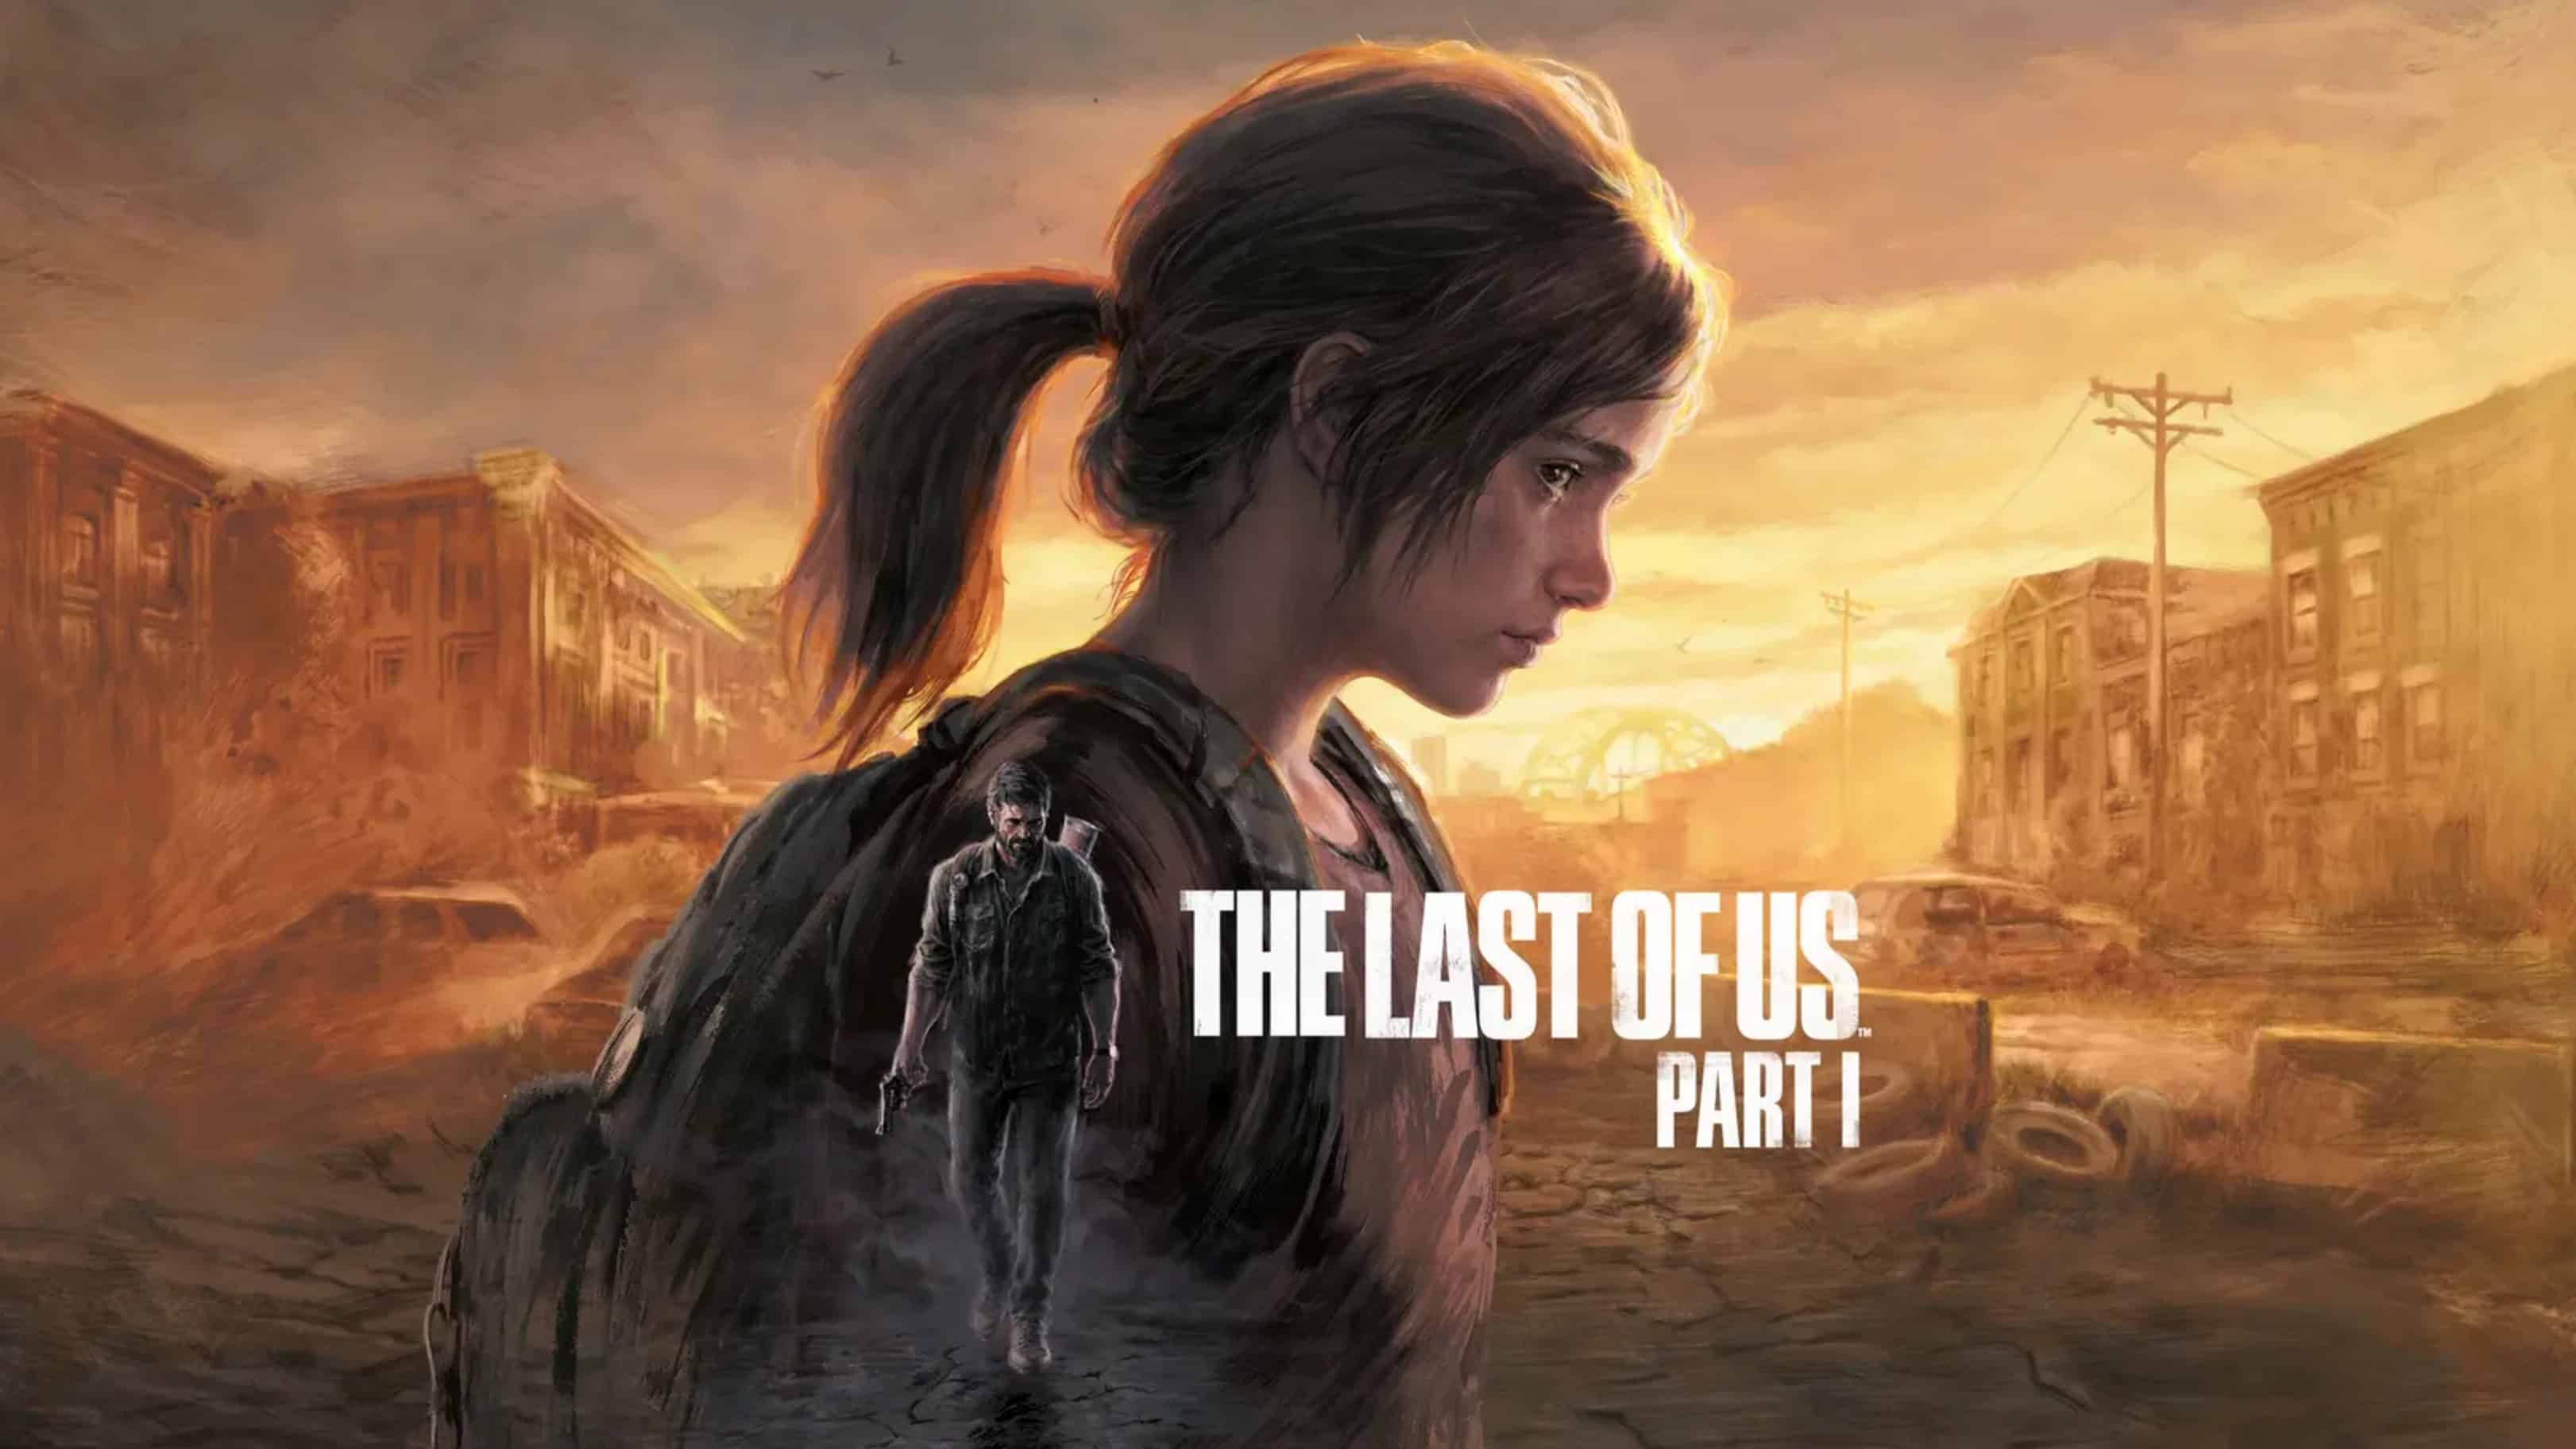 The Last of Us Season 2's Time Jump Plan Addressed by Showrunner